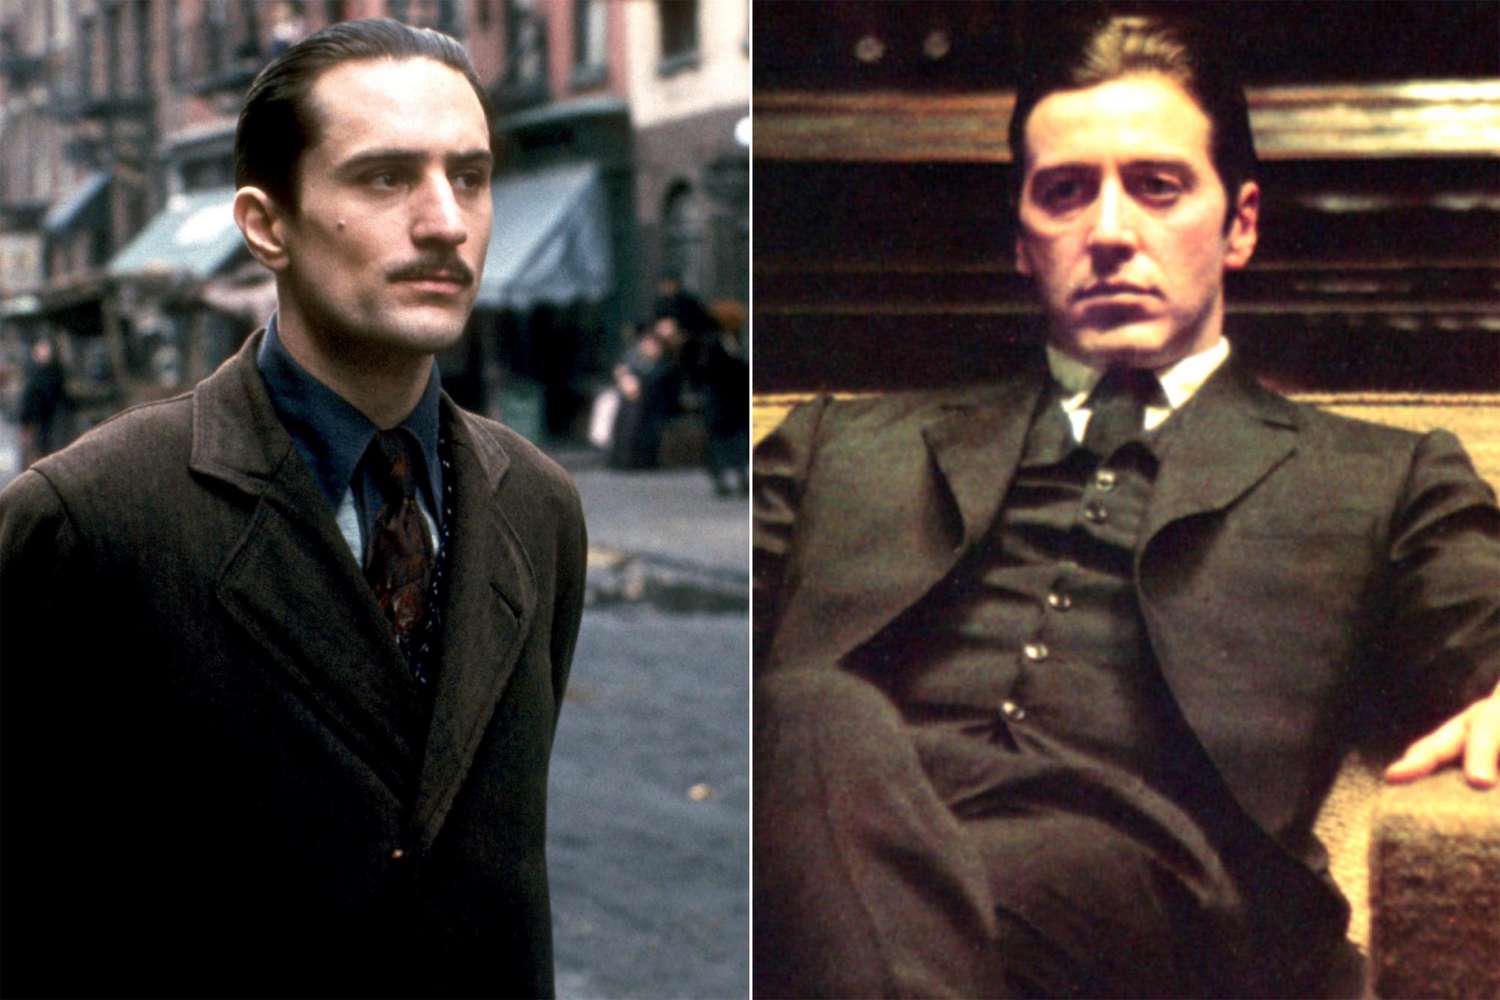 THE GODFATHER: PART II